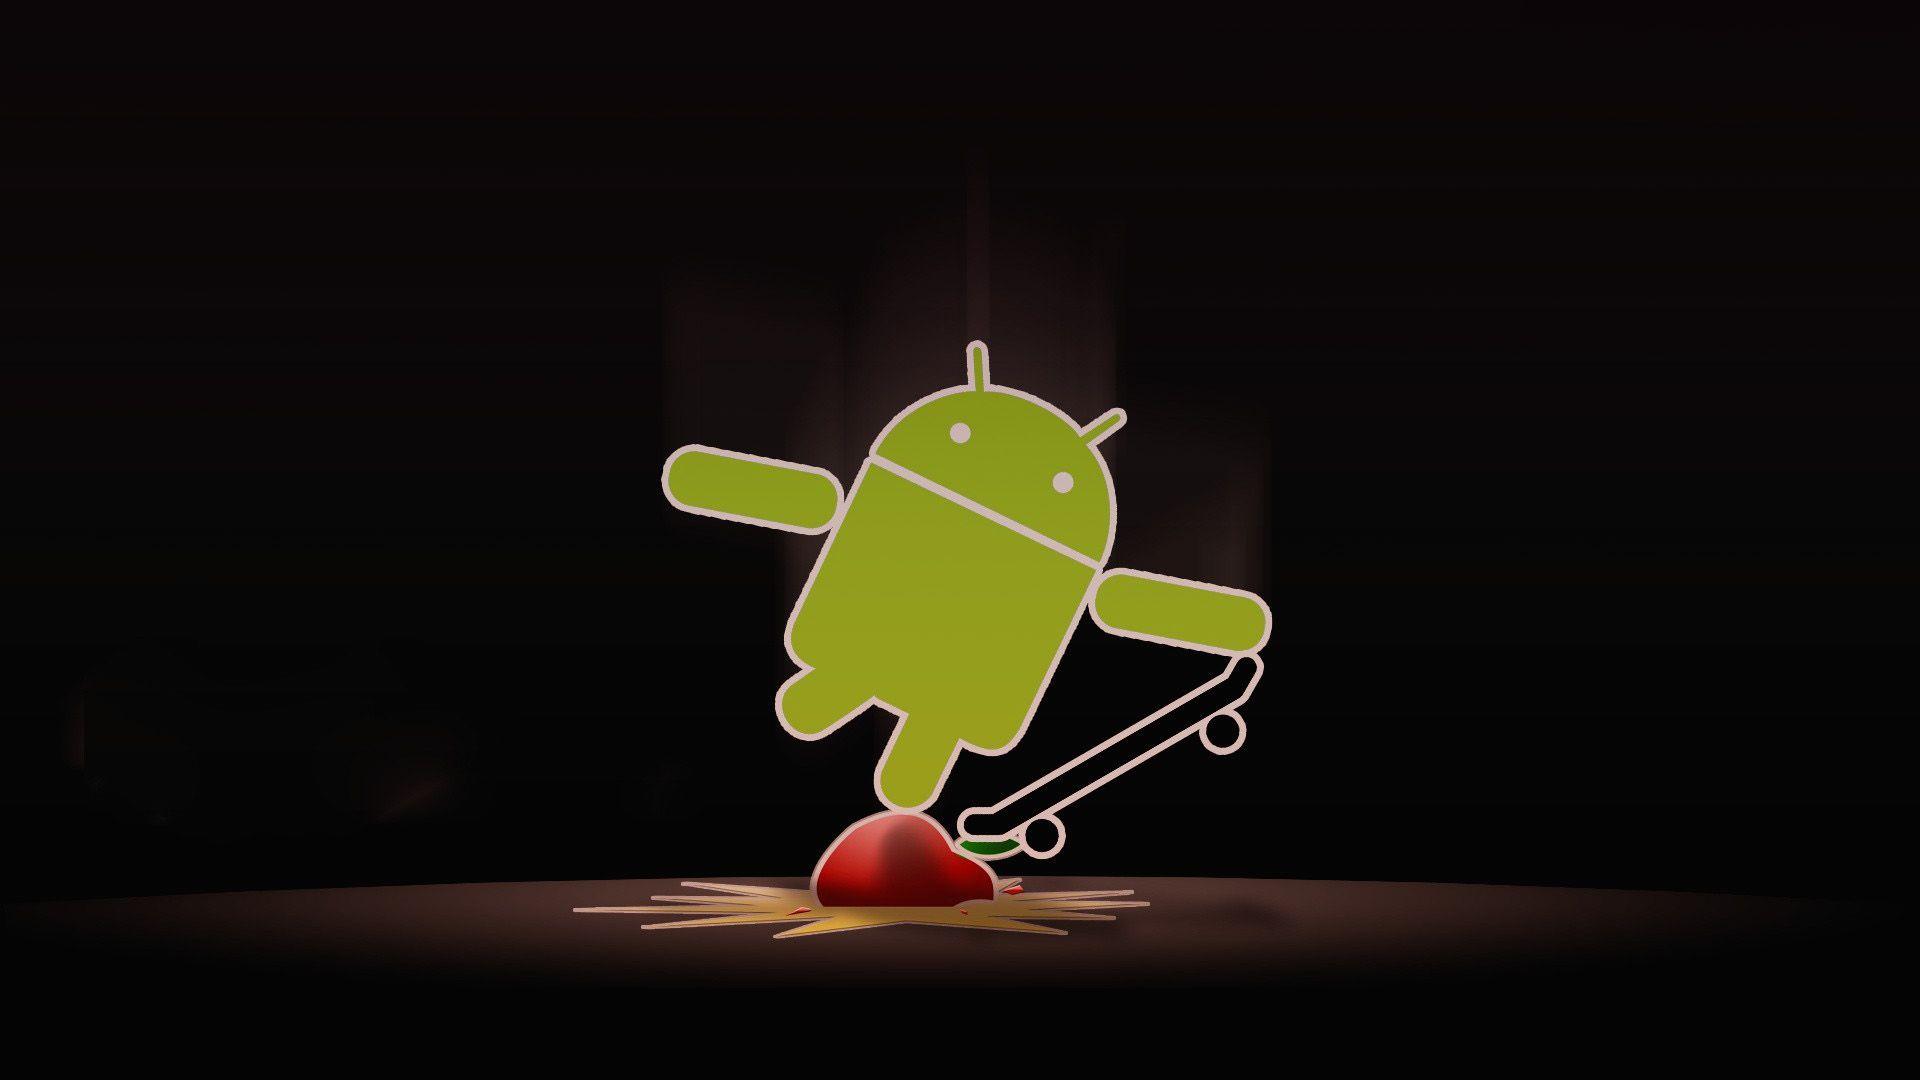 Hình nền 1920x1080 Apple With Android Skate Wallpaper 114